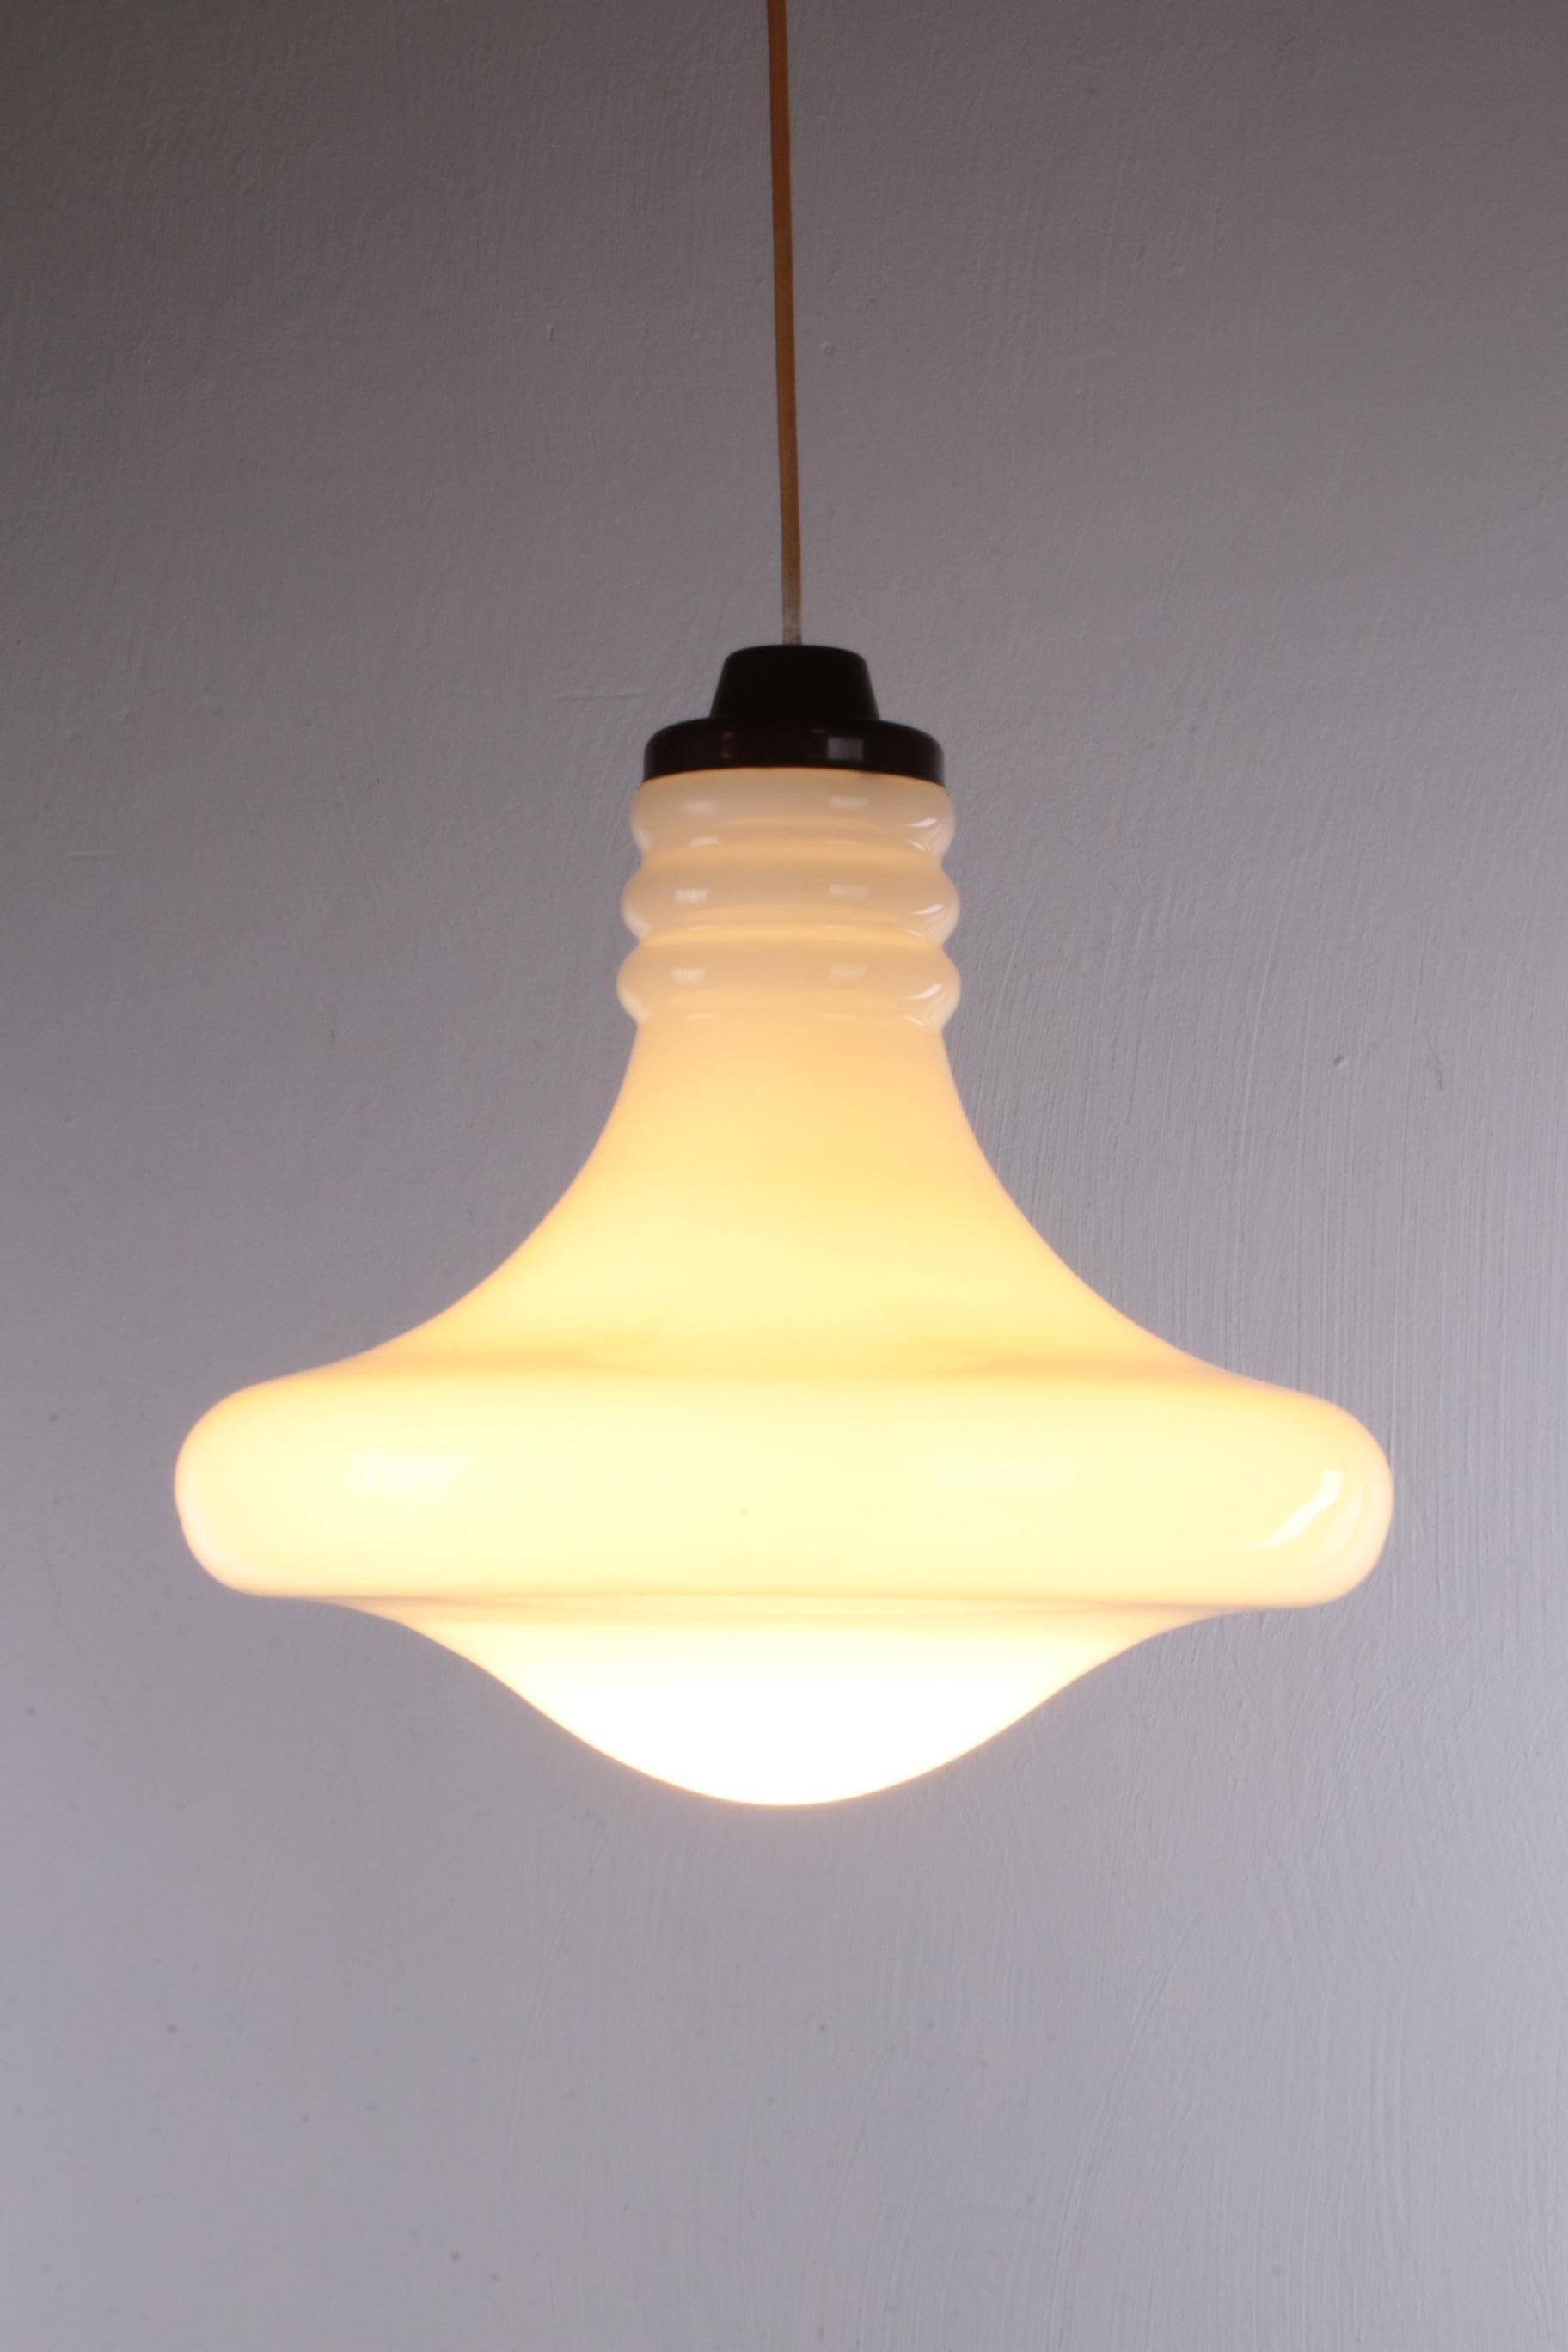 This is a beautiful white glass pendant lamp, whose designer is unfortunately unknown to us.

The lamp is made of white glass with a brown plastic cap. The lamp was produced in Germany around the 1960s.

At the top are beautiful blown rings and